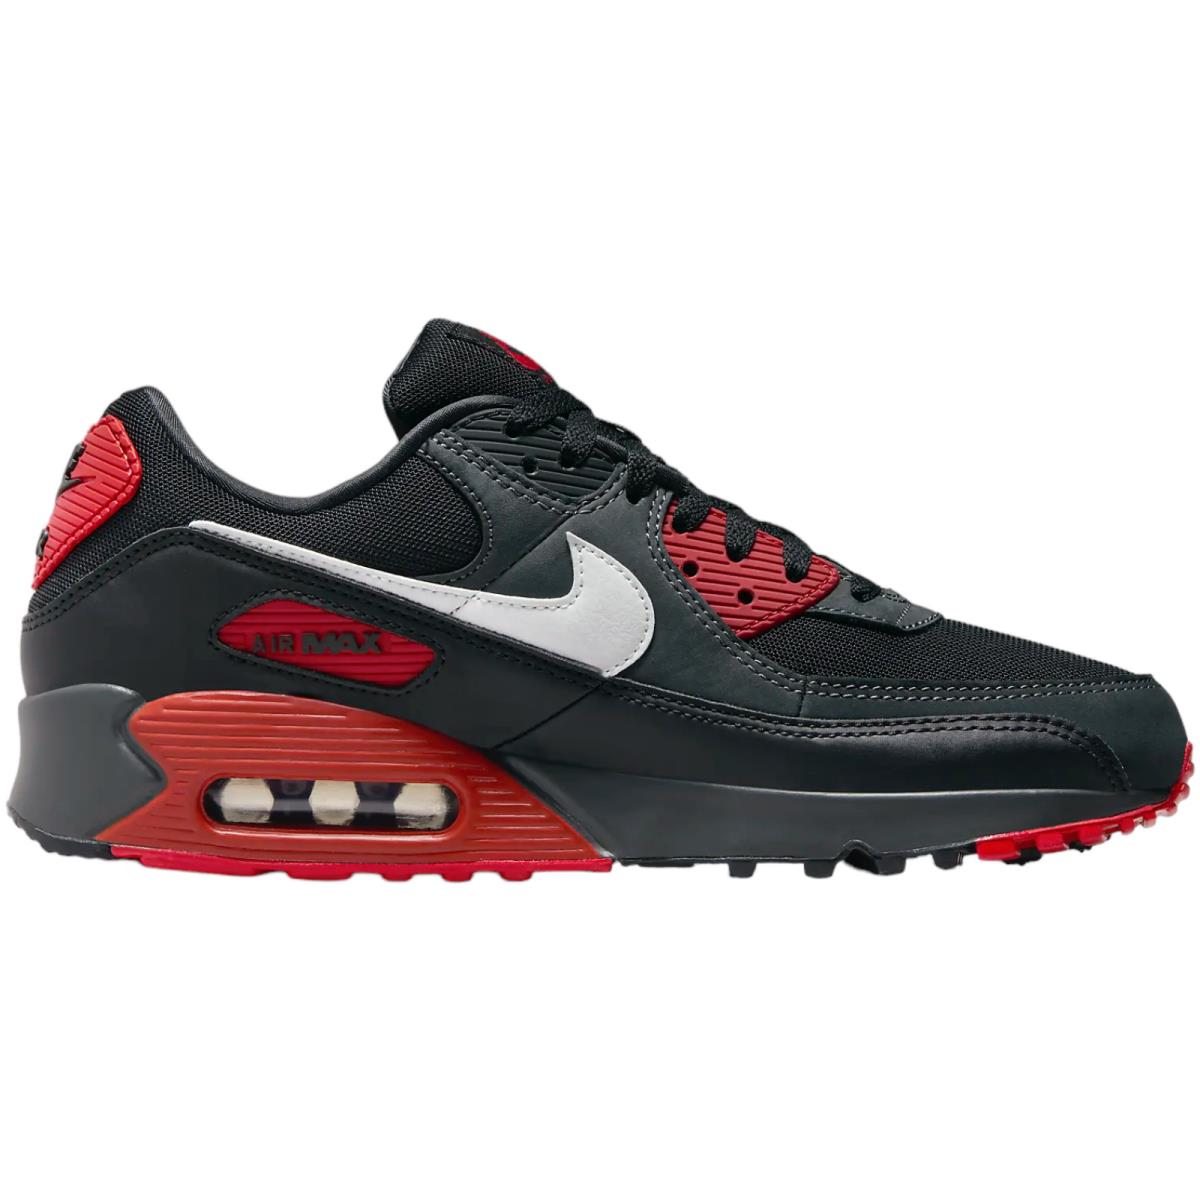 Nike Air Max 90 Men`s Casual Shoes All Colors US Sizes 7-14 Bestseller Anthracite/Black/Mystic Red/Summit White